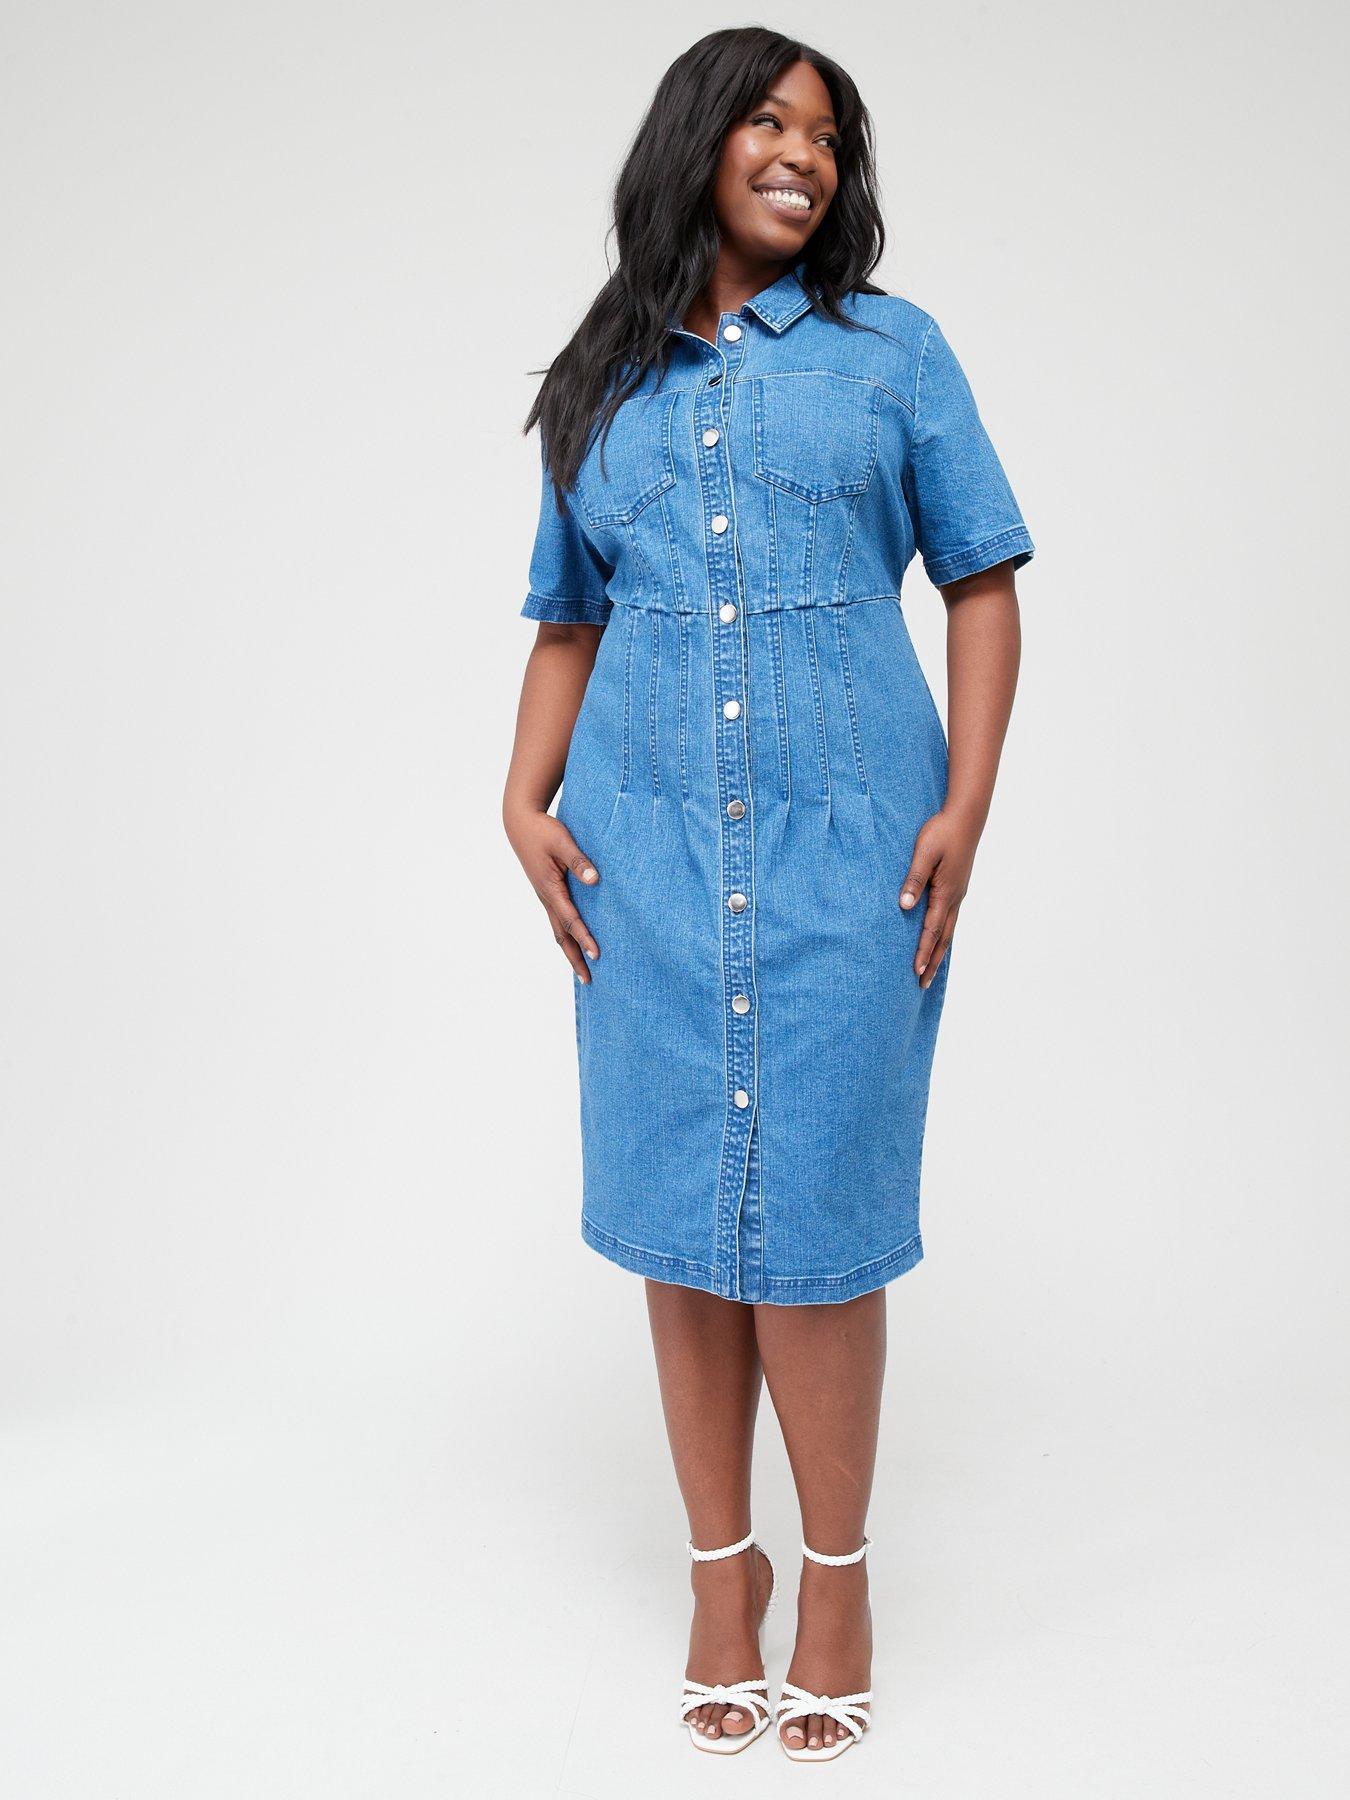 10 Denim Dresses You Can Wear Now and Straight Through Fall